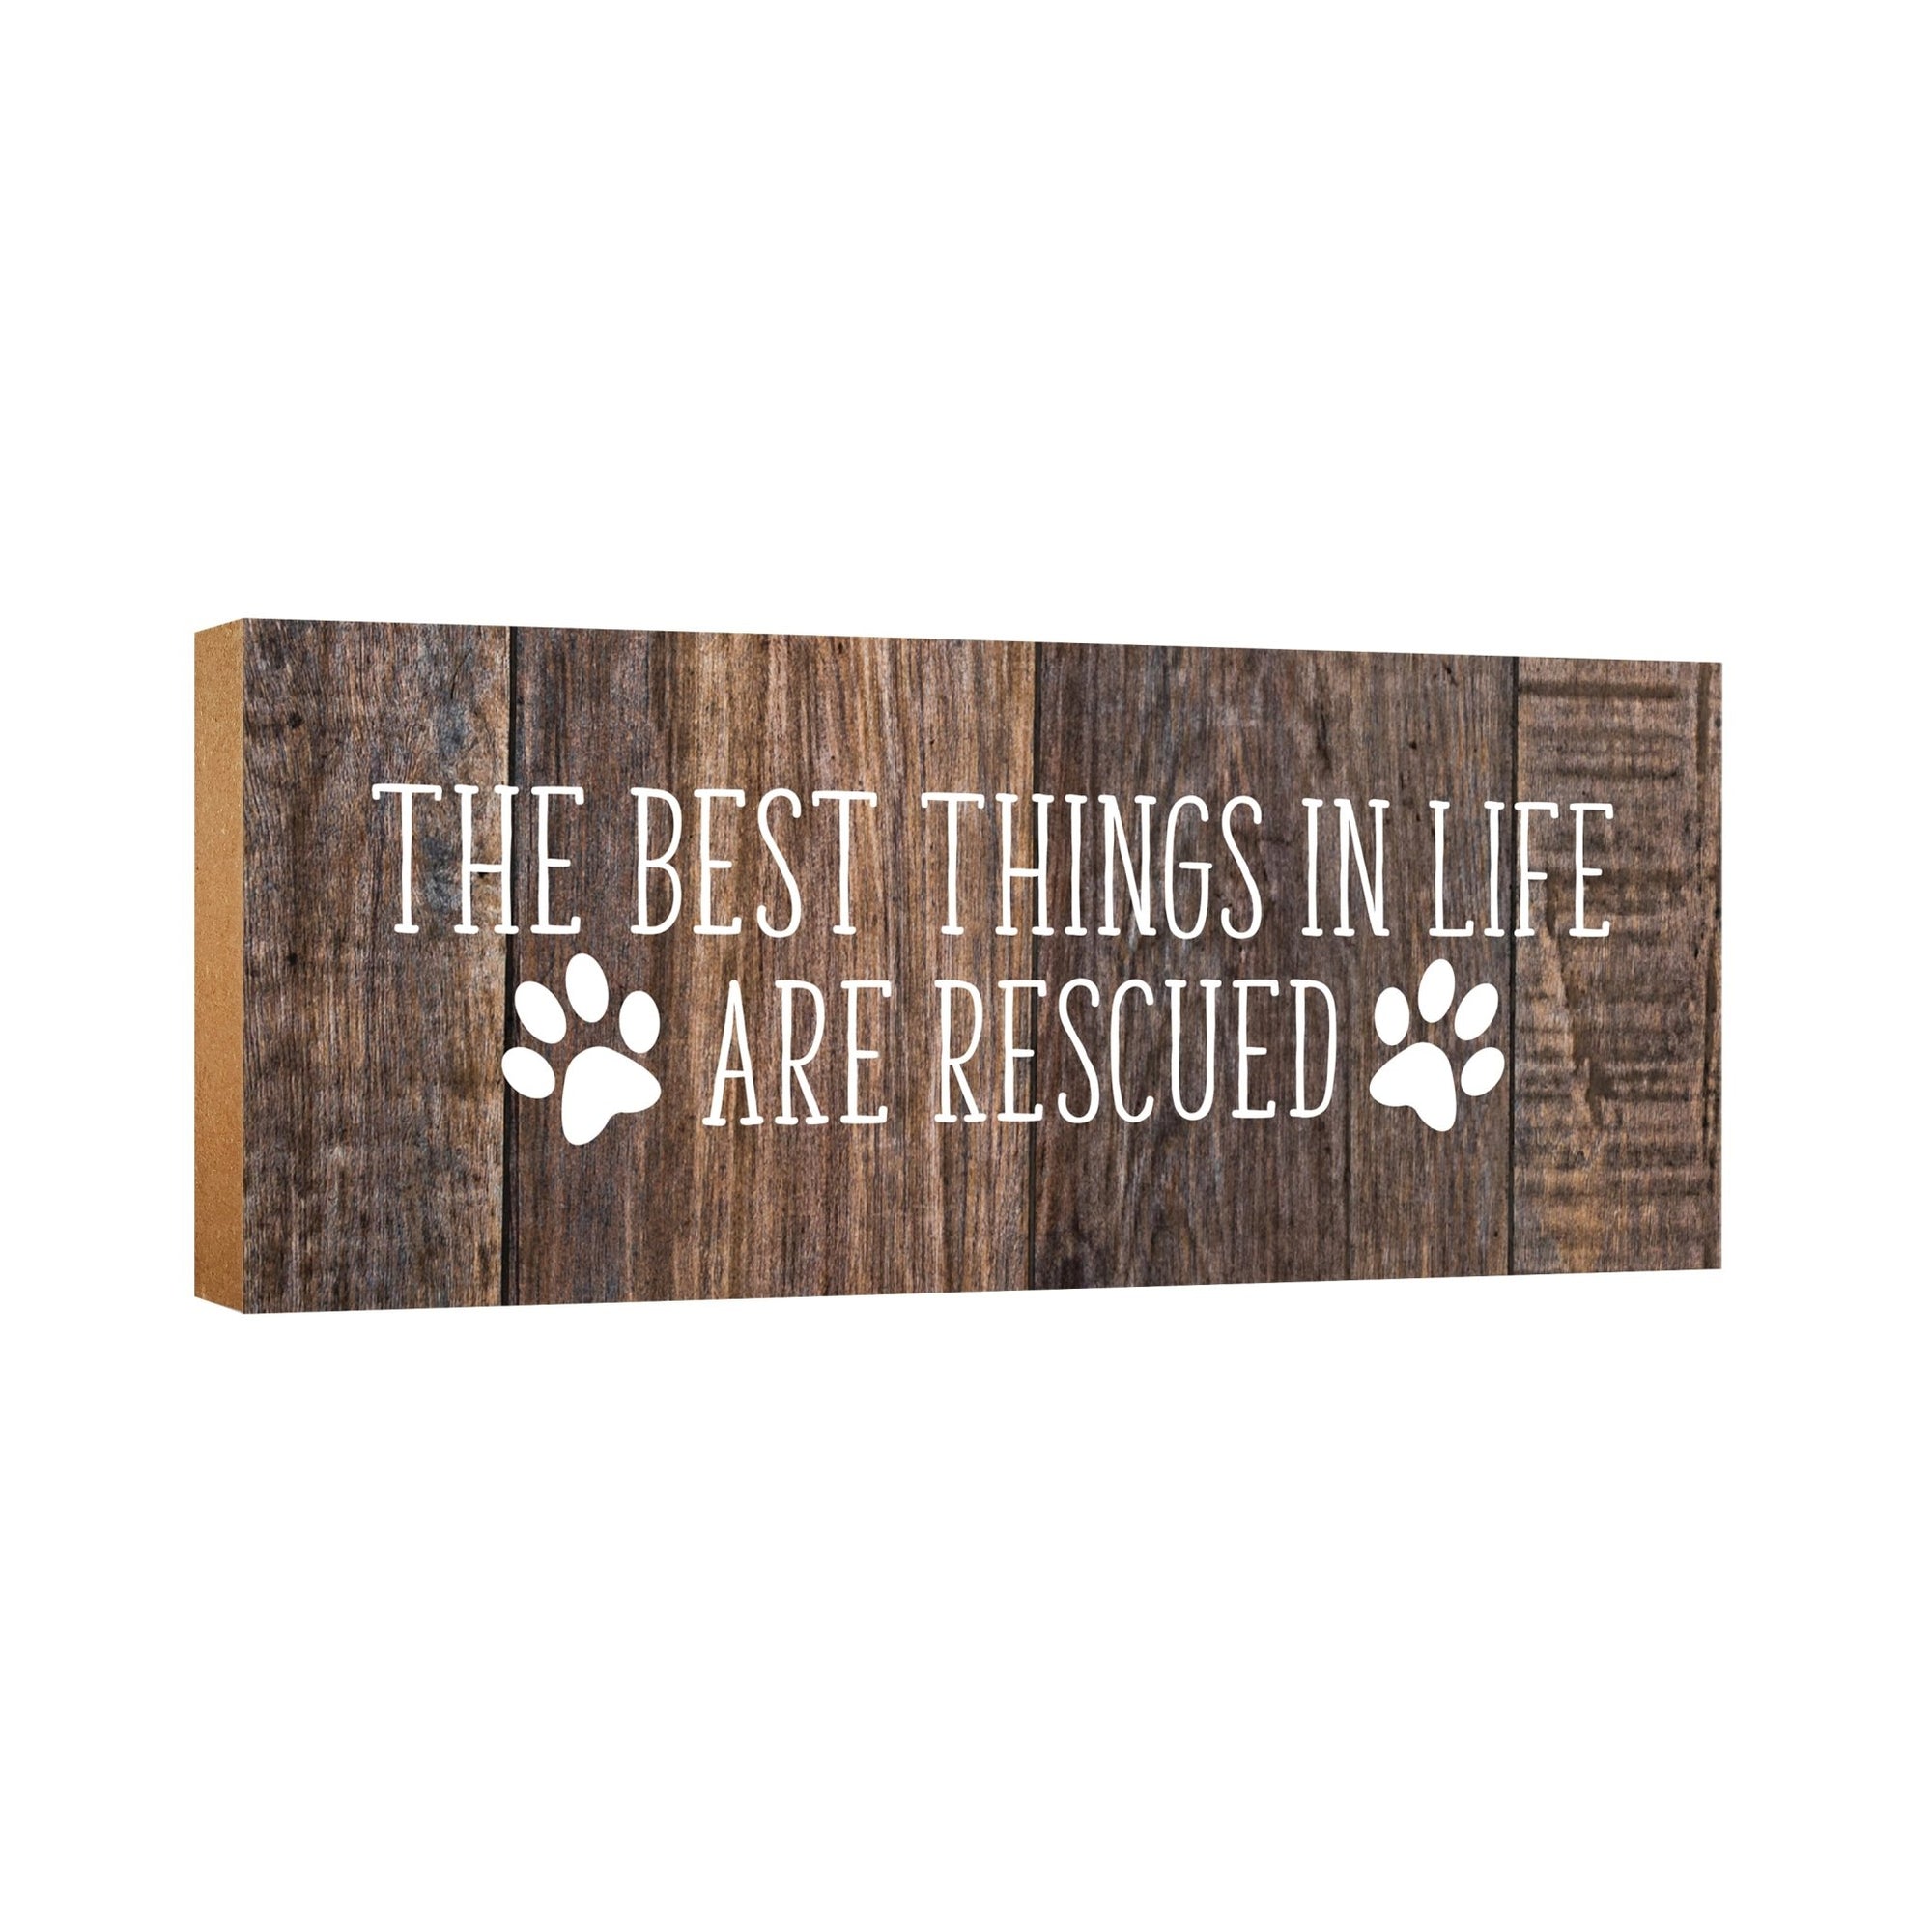 Modern Inspirational Pet Memorial 4x10 inches Wooden Sign (Rescued) Tabletop Plaque Home Decoration Loss of Pet Bereavement Sympathy Keepsake - LifeSong Milestones